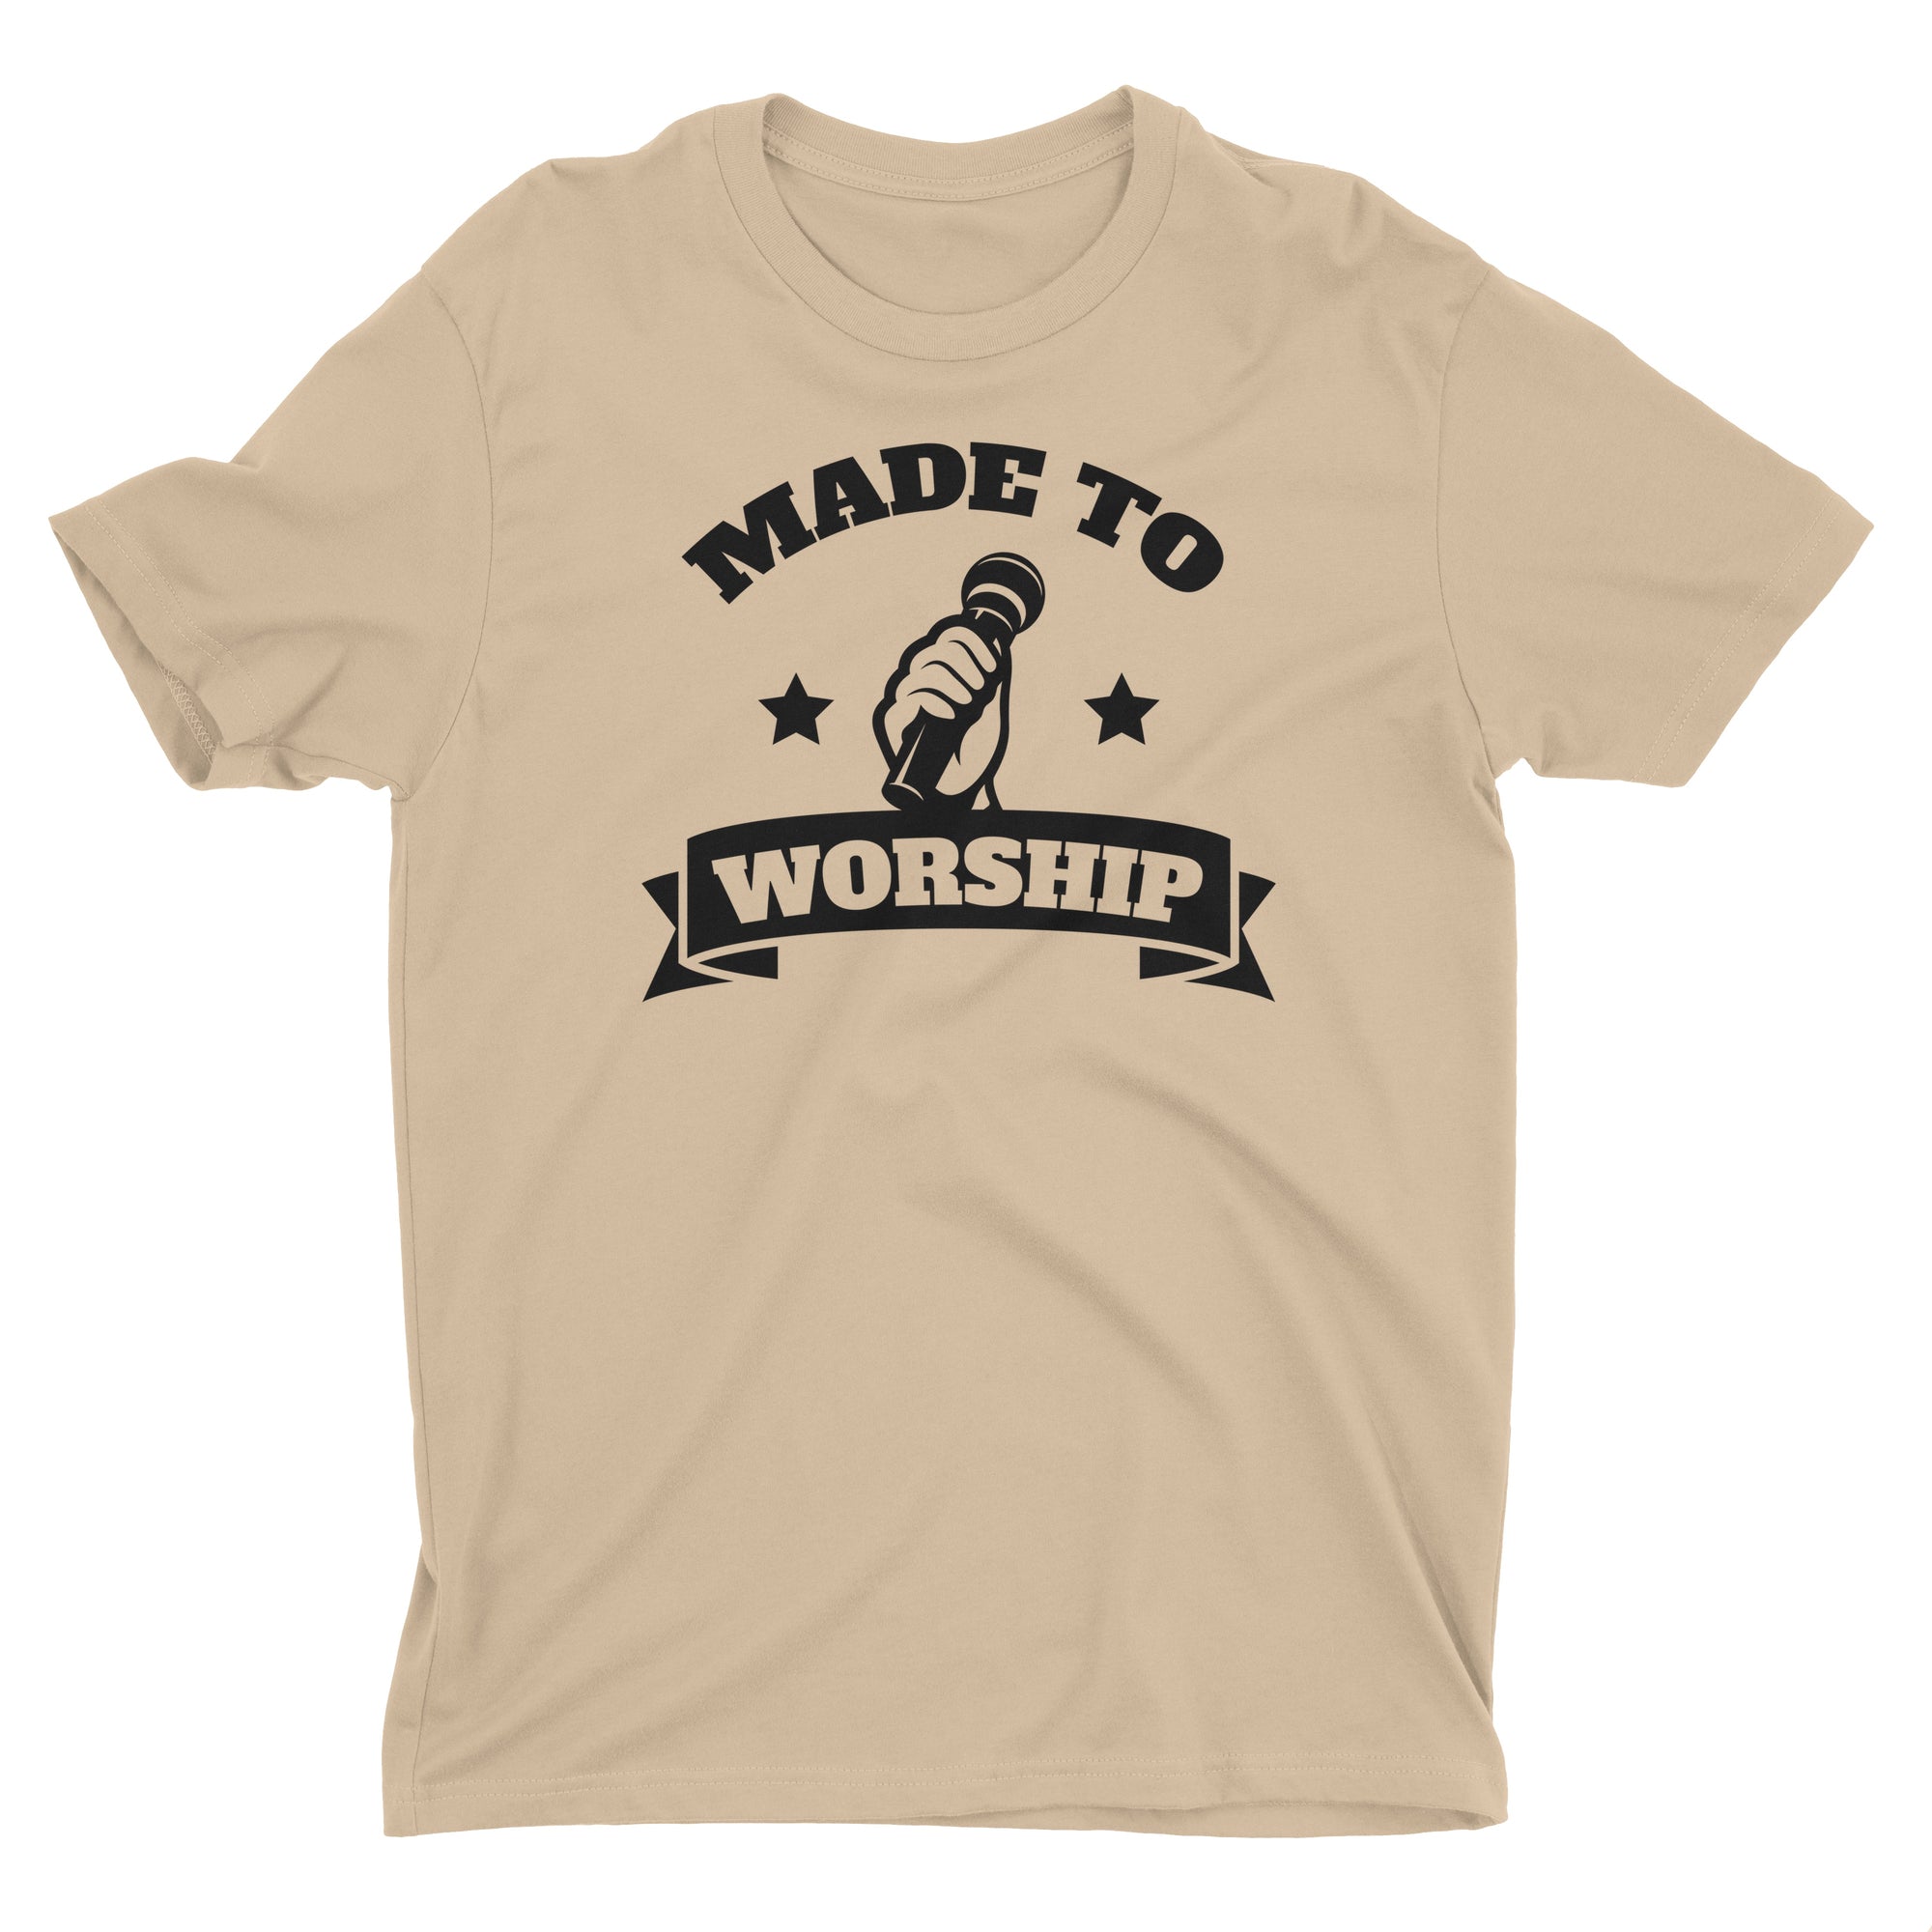 Made To Worship Lead Singer Vocals Music Worshiper Band Christian T-Shirt for Men